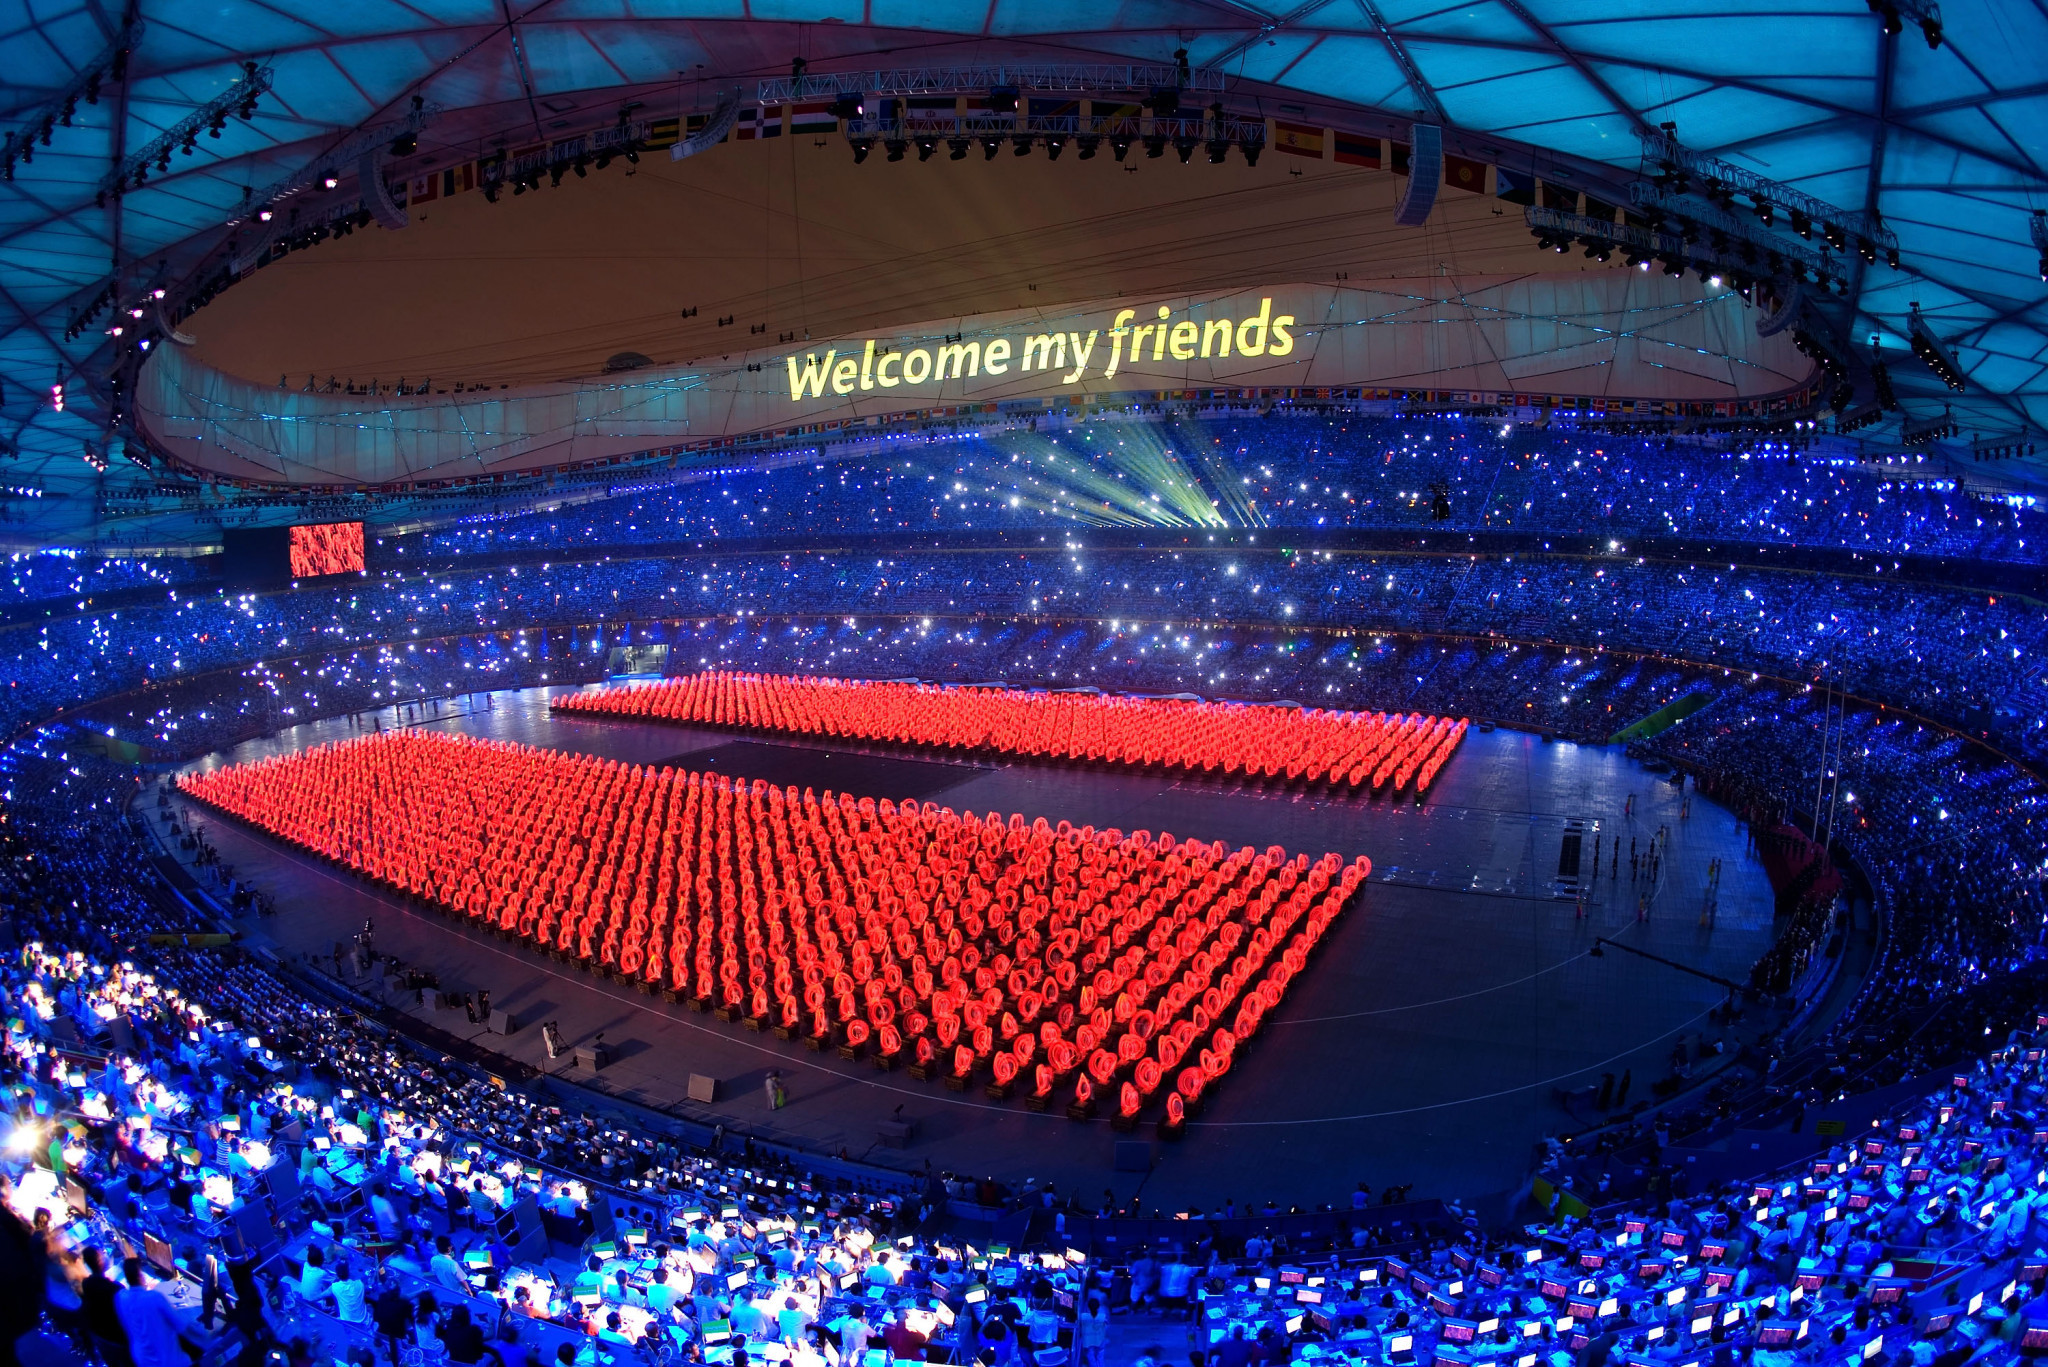 When Beijing was awarded hosting rights for the 2008 Summer Olympics in 2001, relations between China and the West were perceived as being on an improving path ©Getty Images